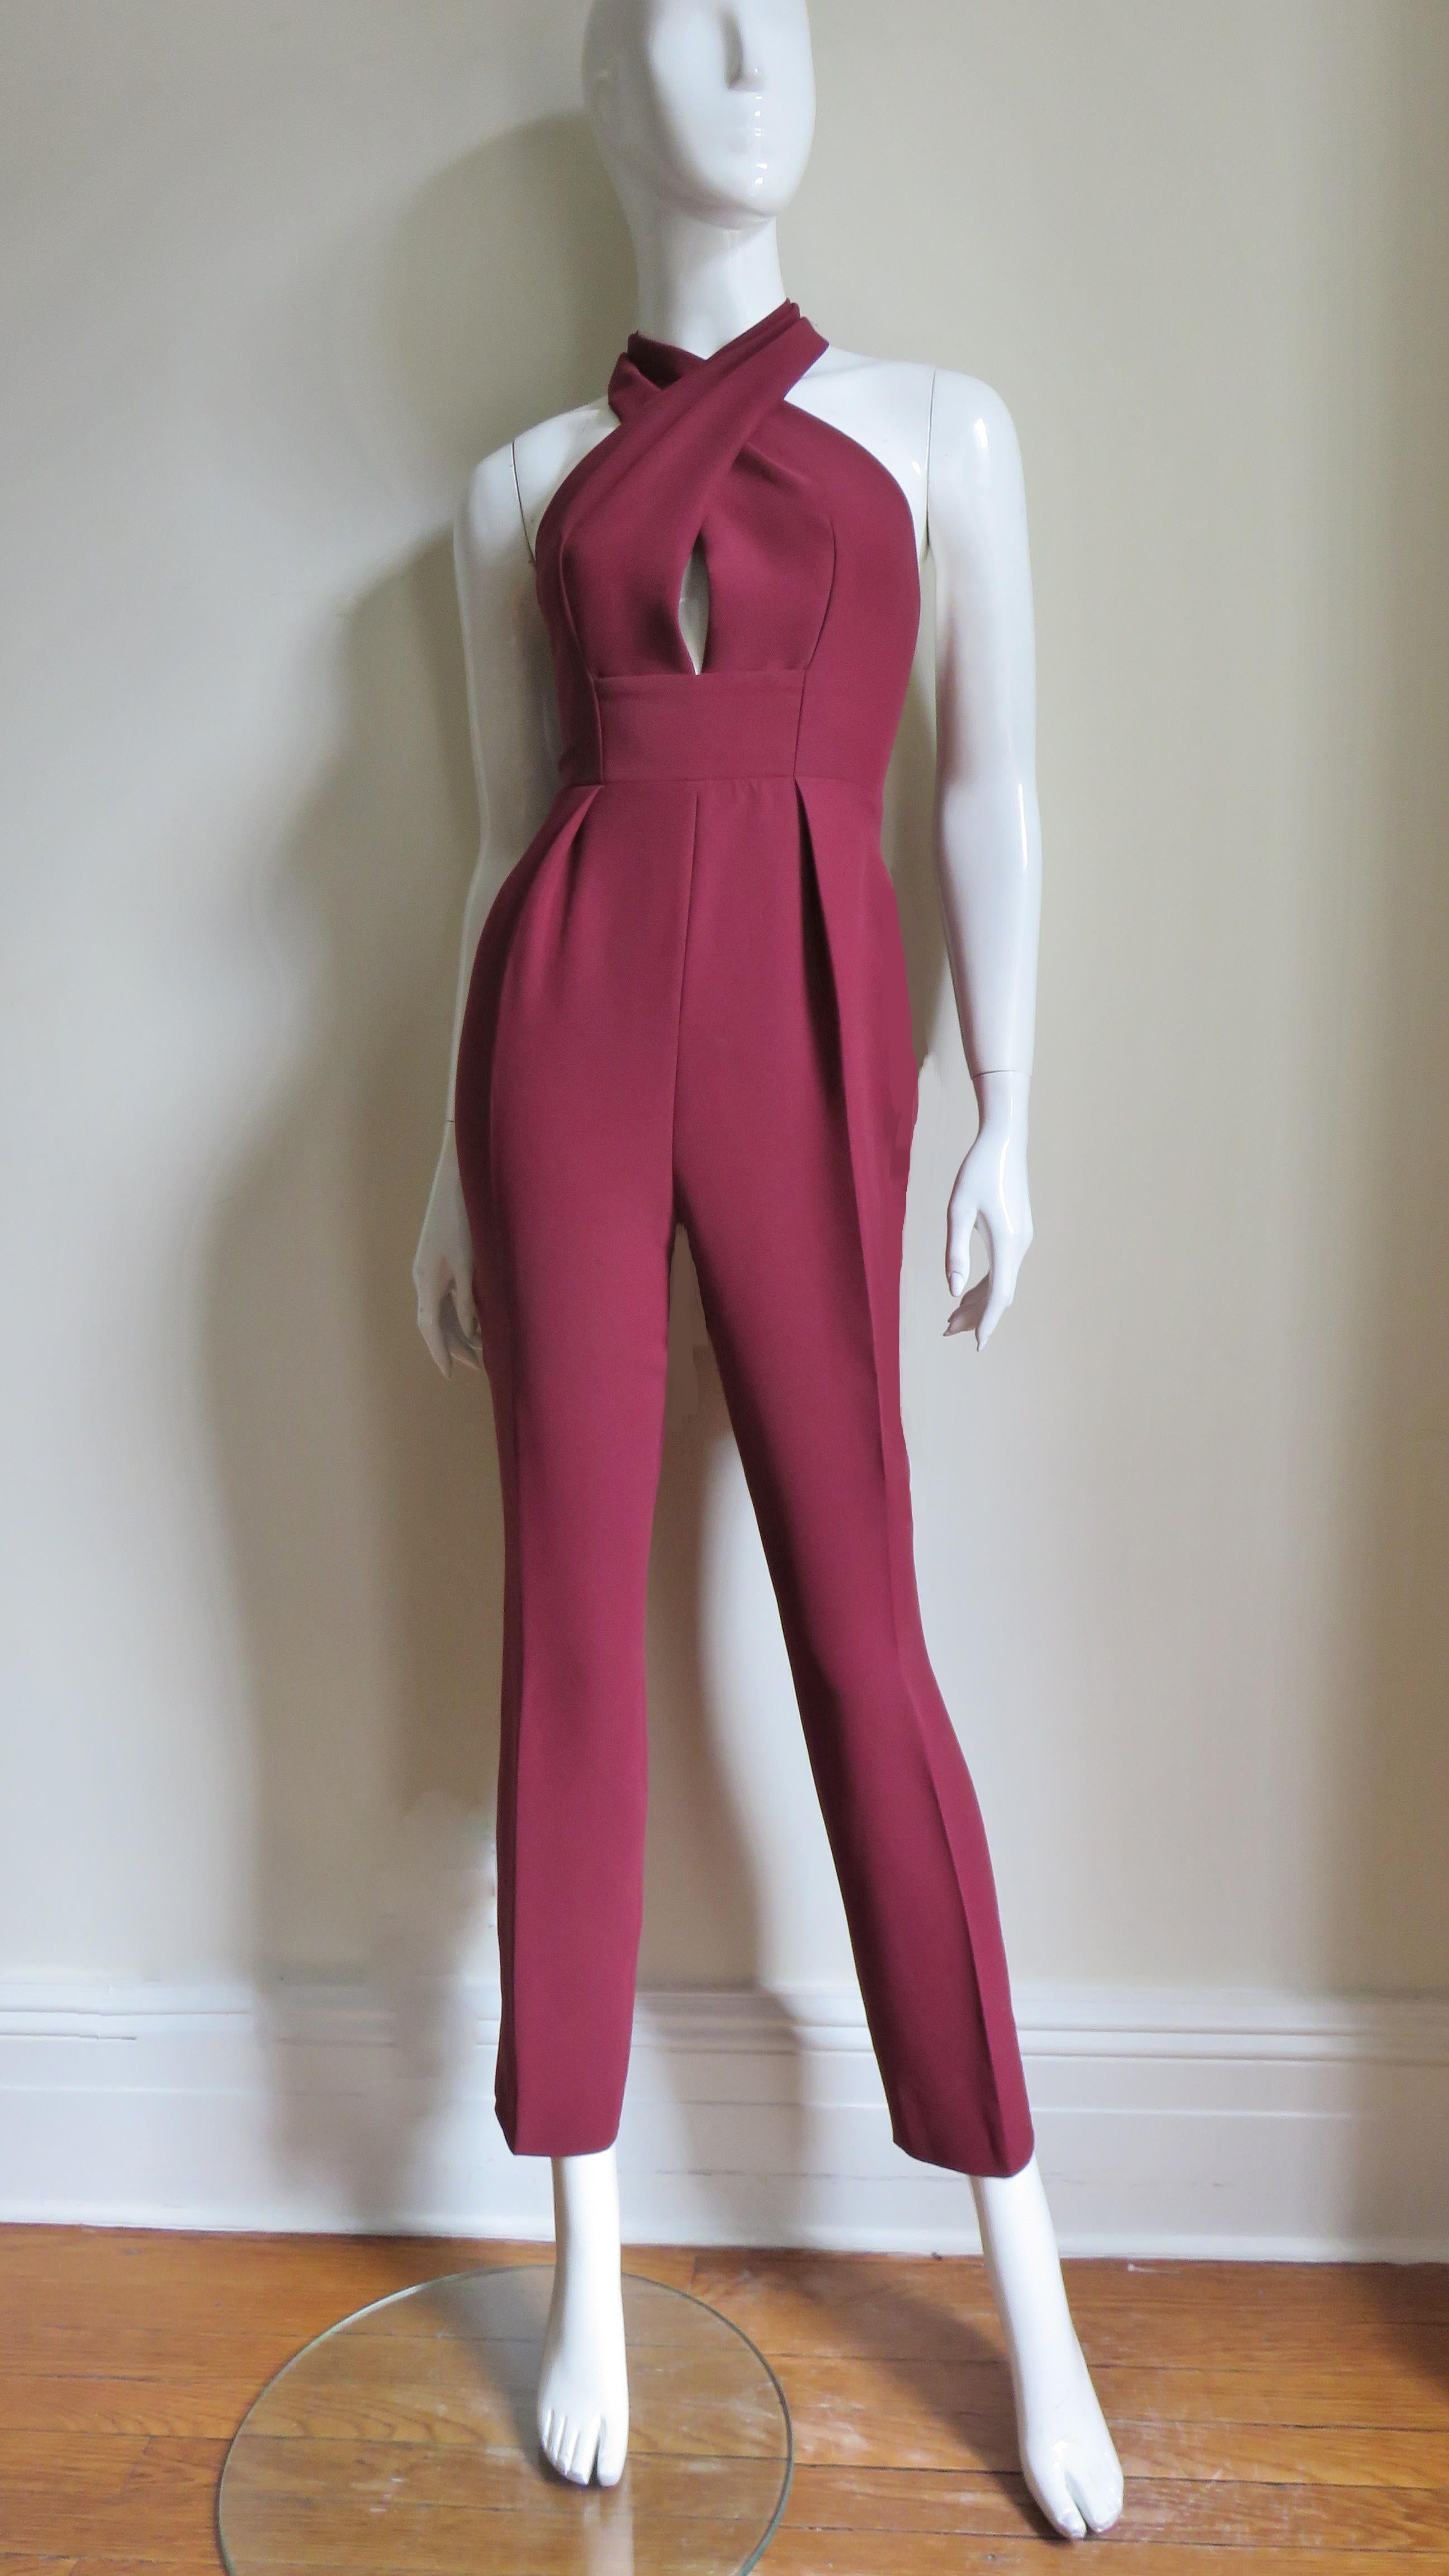 A fabulous deep red silk jumpsuit from Gucci.  It has a  halter neckline crossing at the front then wrapping around the neck. There is a band at the waist and the pants portion are straight leg.  It is unlined with a back zipper and matching mother